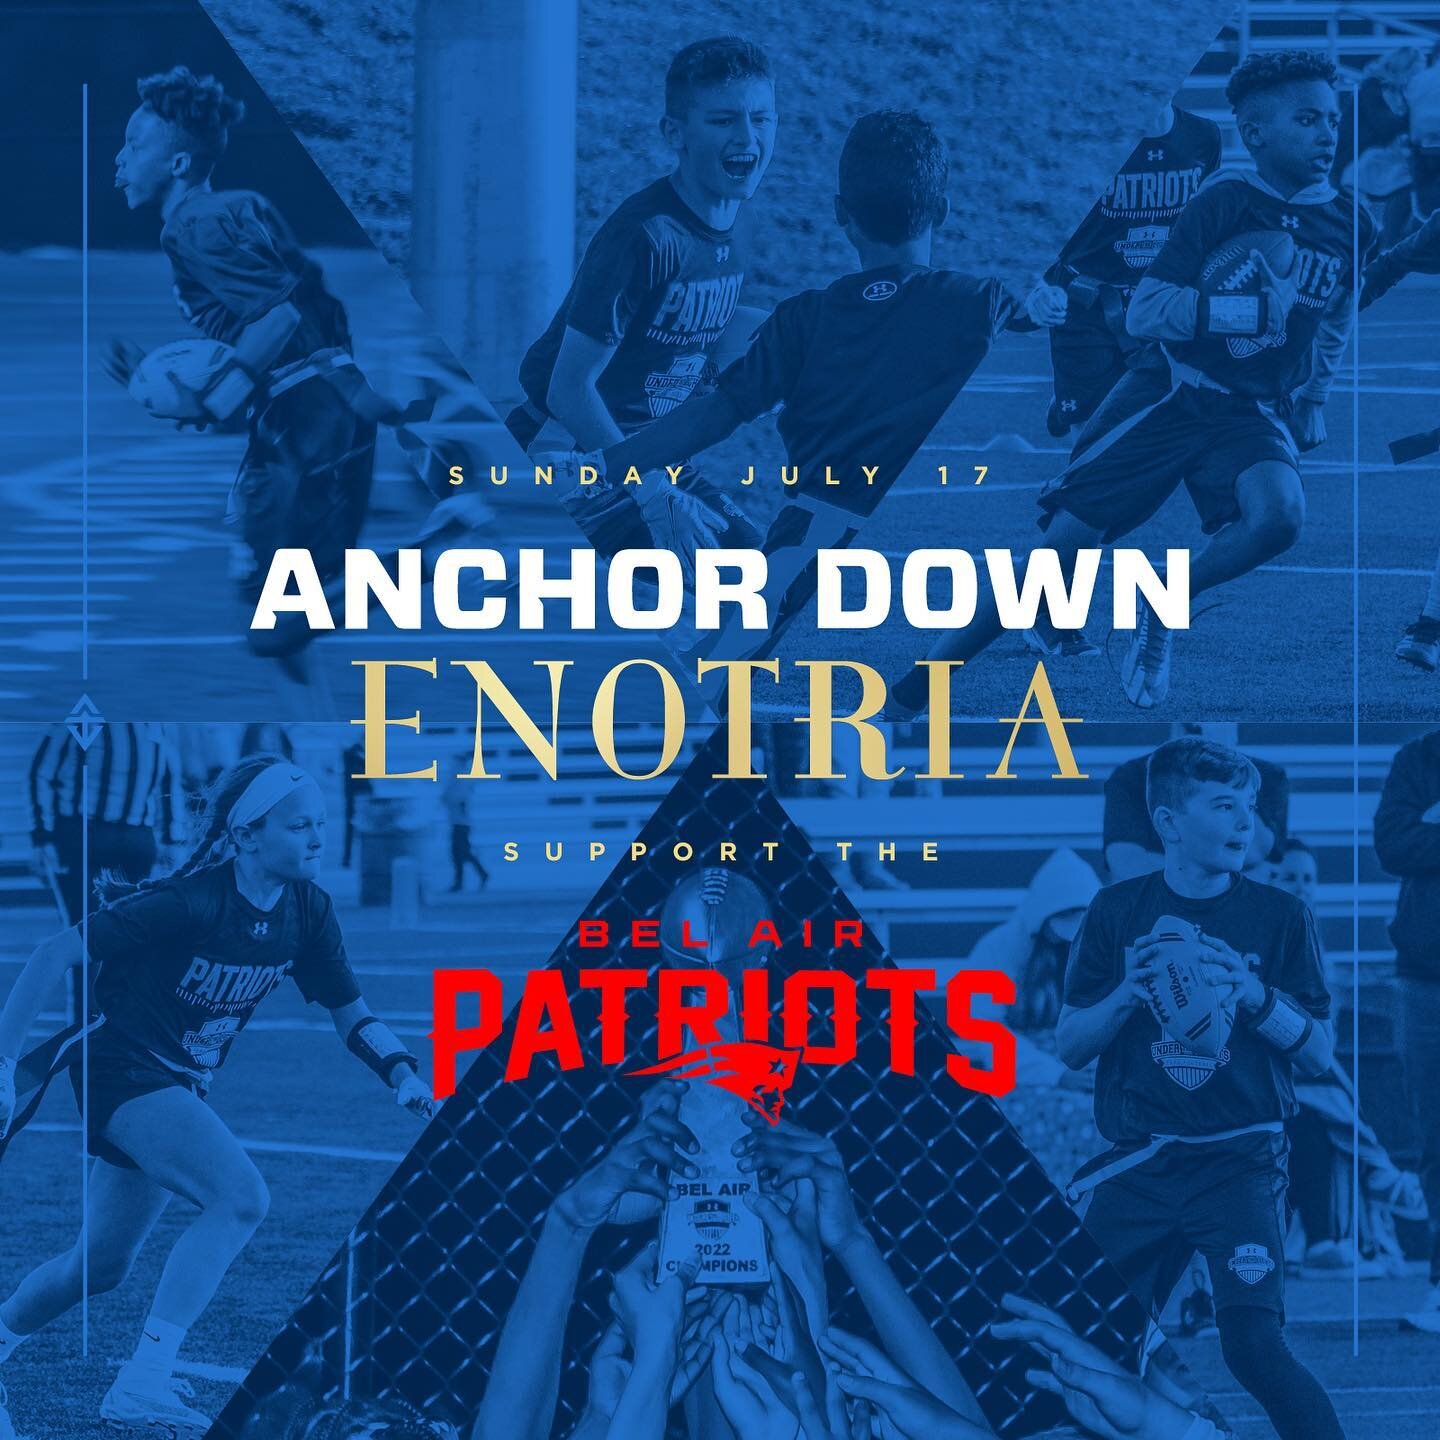 We hope to see you at @enotriaitalian this Sunday from noon-9 as we celebrate and fundraise for the Bel Air Patriots&rsquo; trip to the @underthelightsflag National Championships at @imgacademy! See you there! 
&bull;
#anchordown #anchorathletics